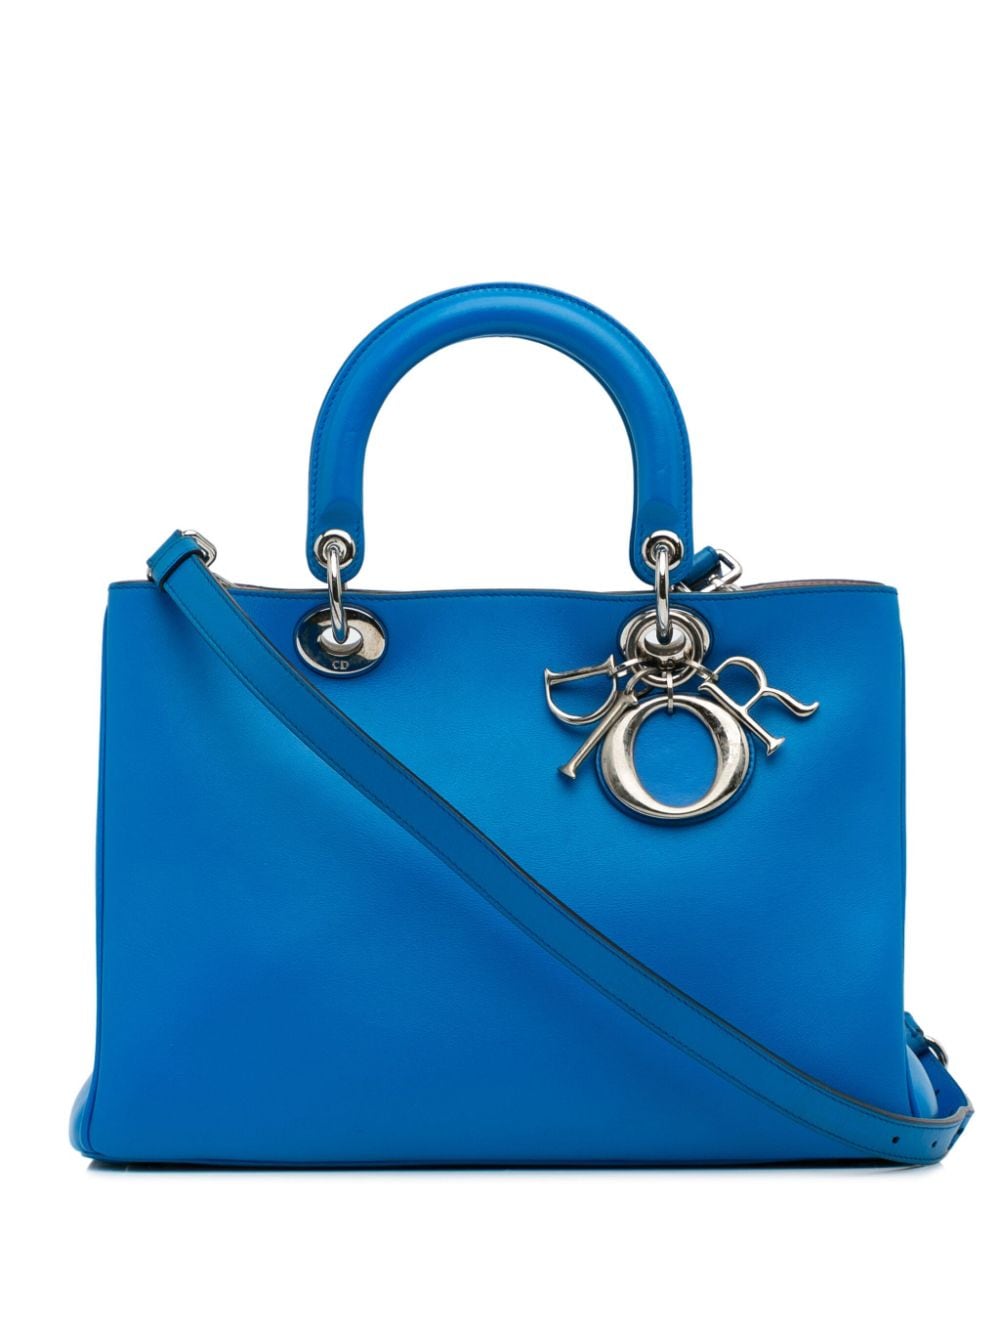 Christian Dior Pre-Owned 2013 große Diorissimo Handtasche - Blau von Christian Dior Pre-Owned